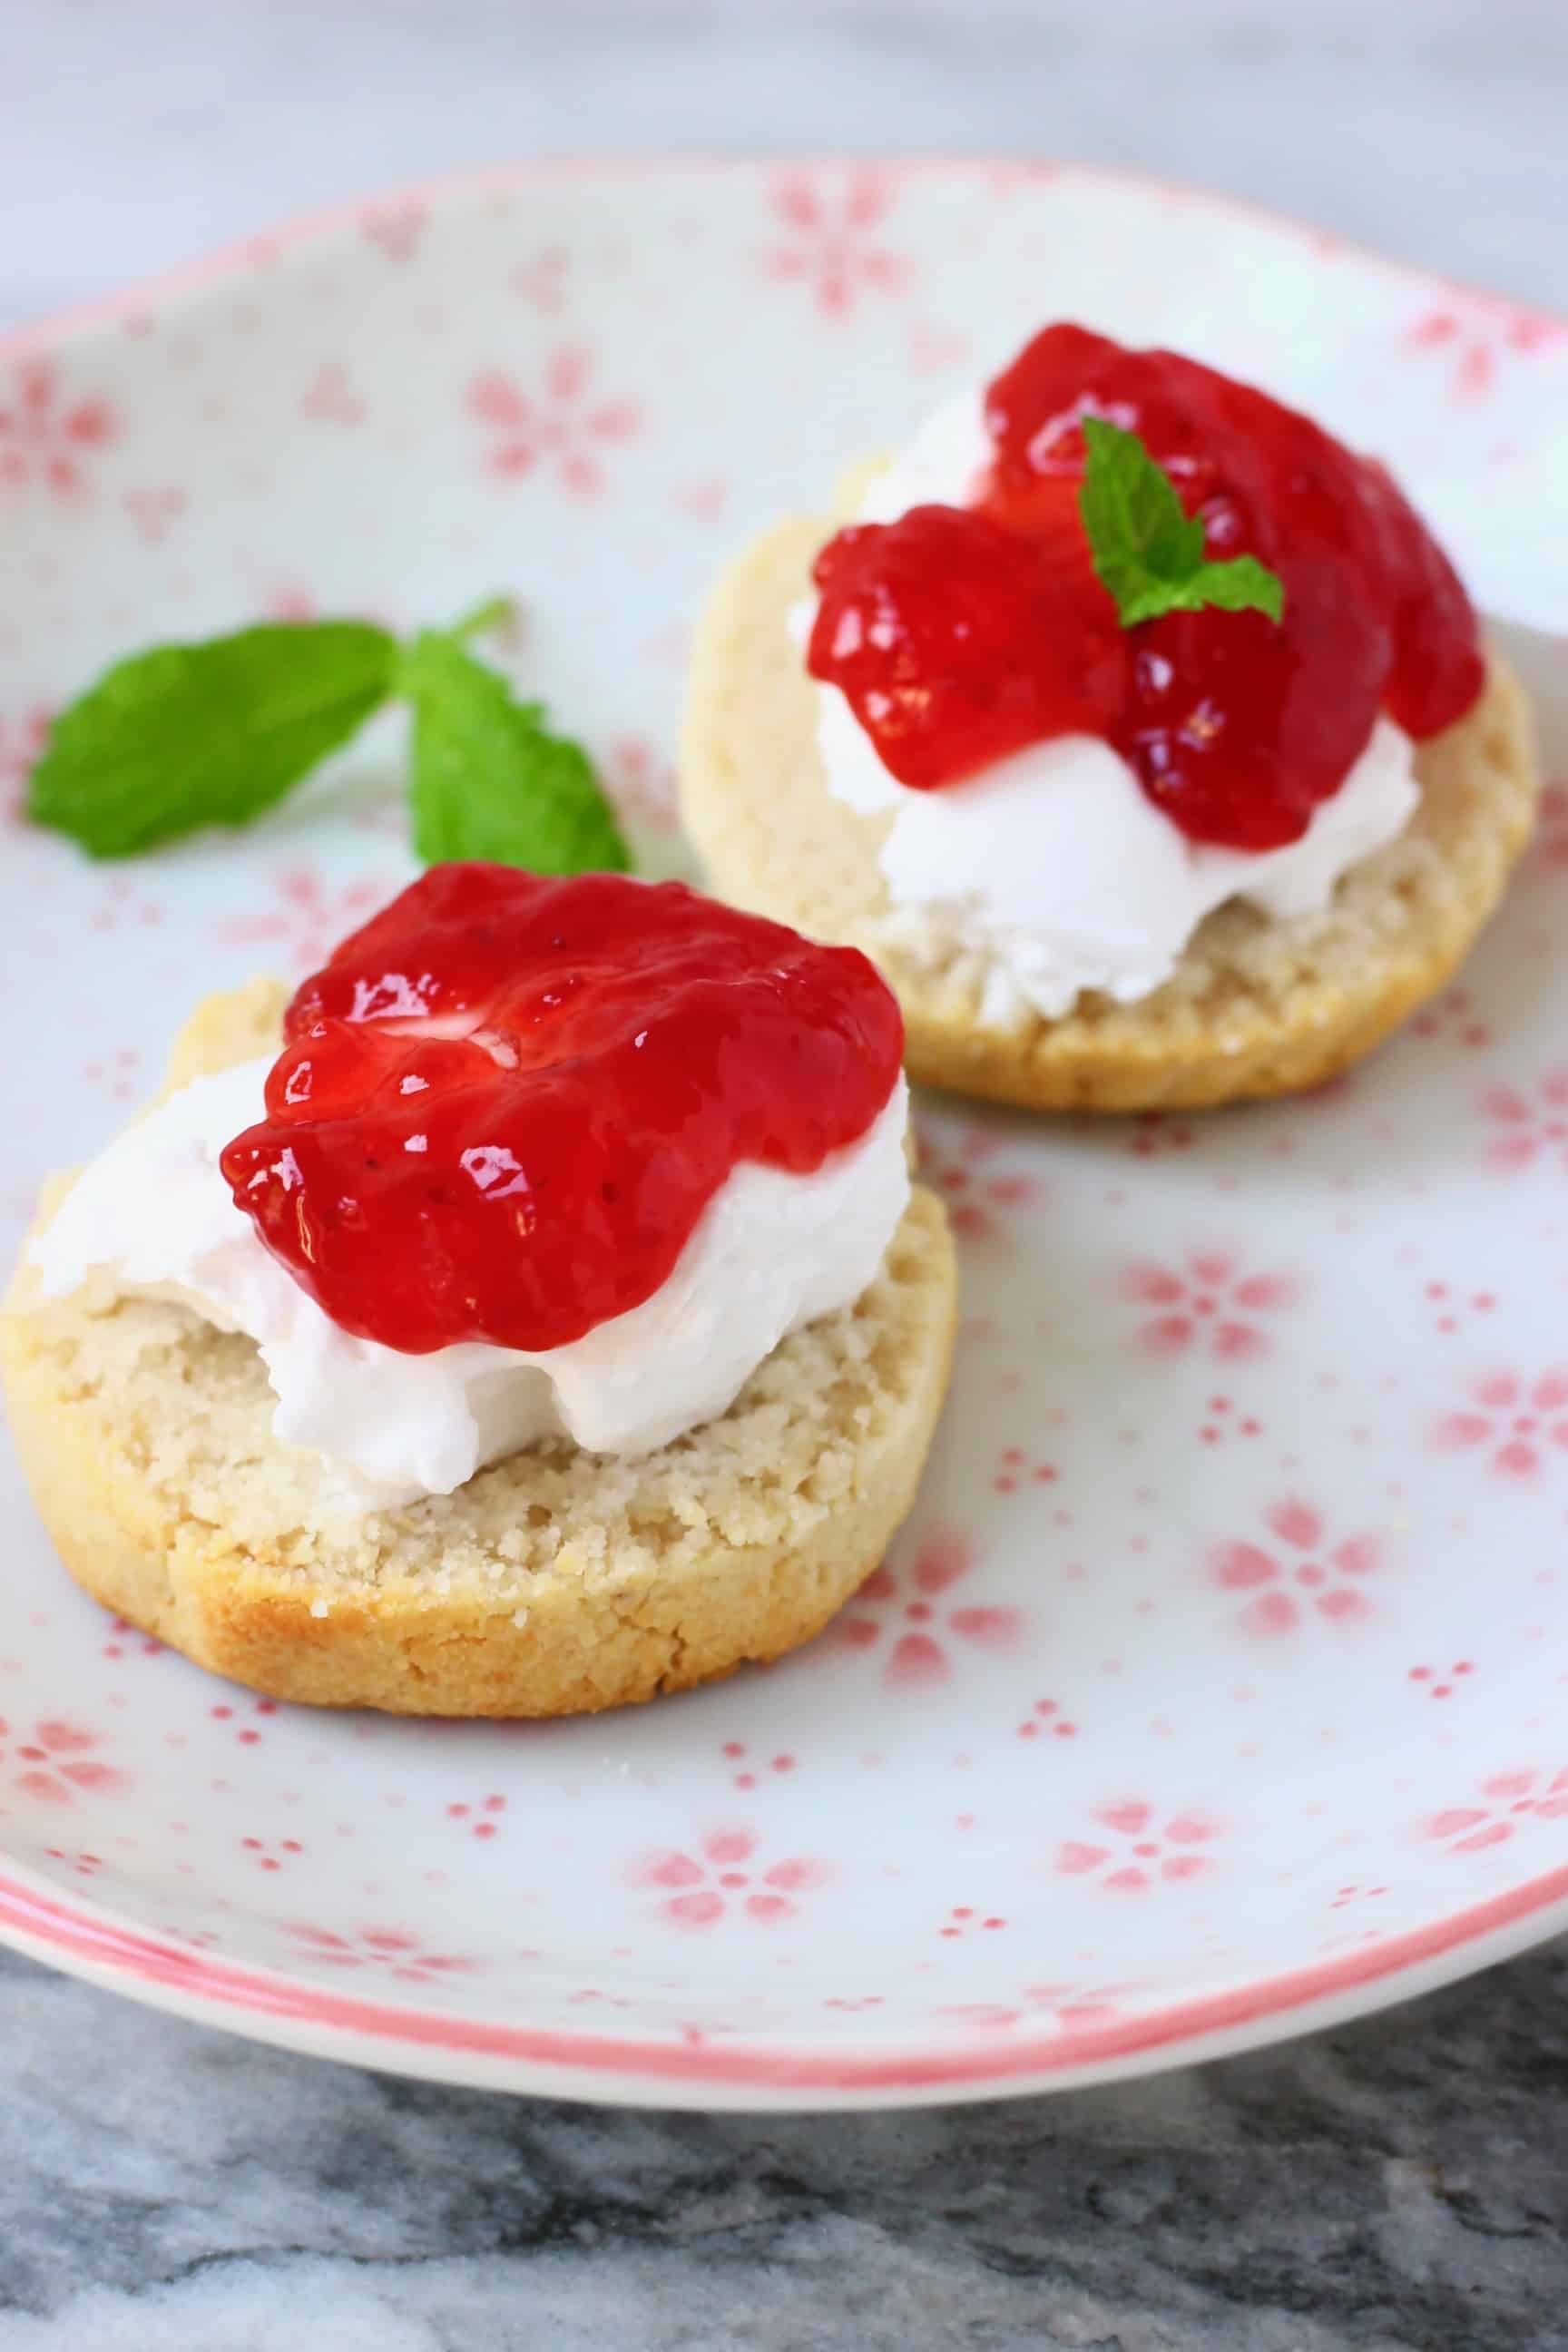 Two gluten-free vegan scone halves topped with white cream and strawberry jam decorated with mint leaves on a plate